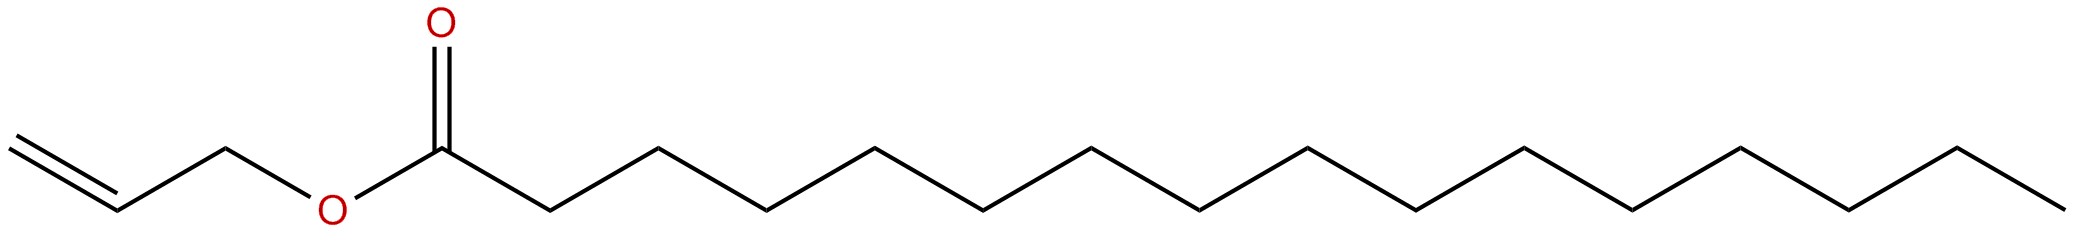 Image of allyl palmitate